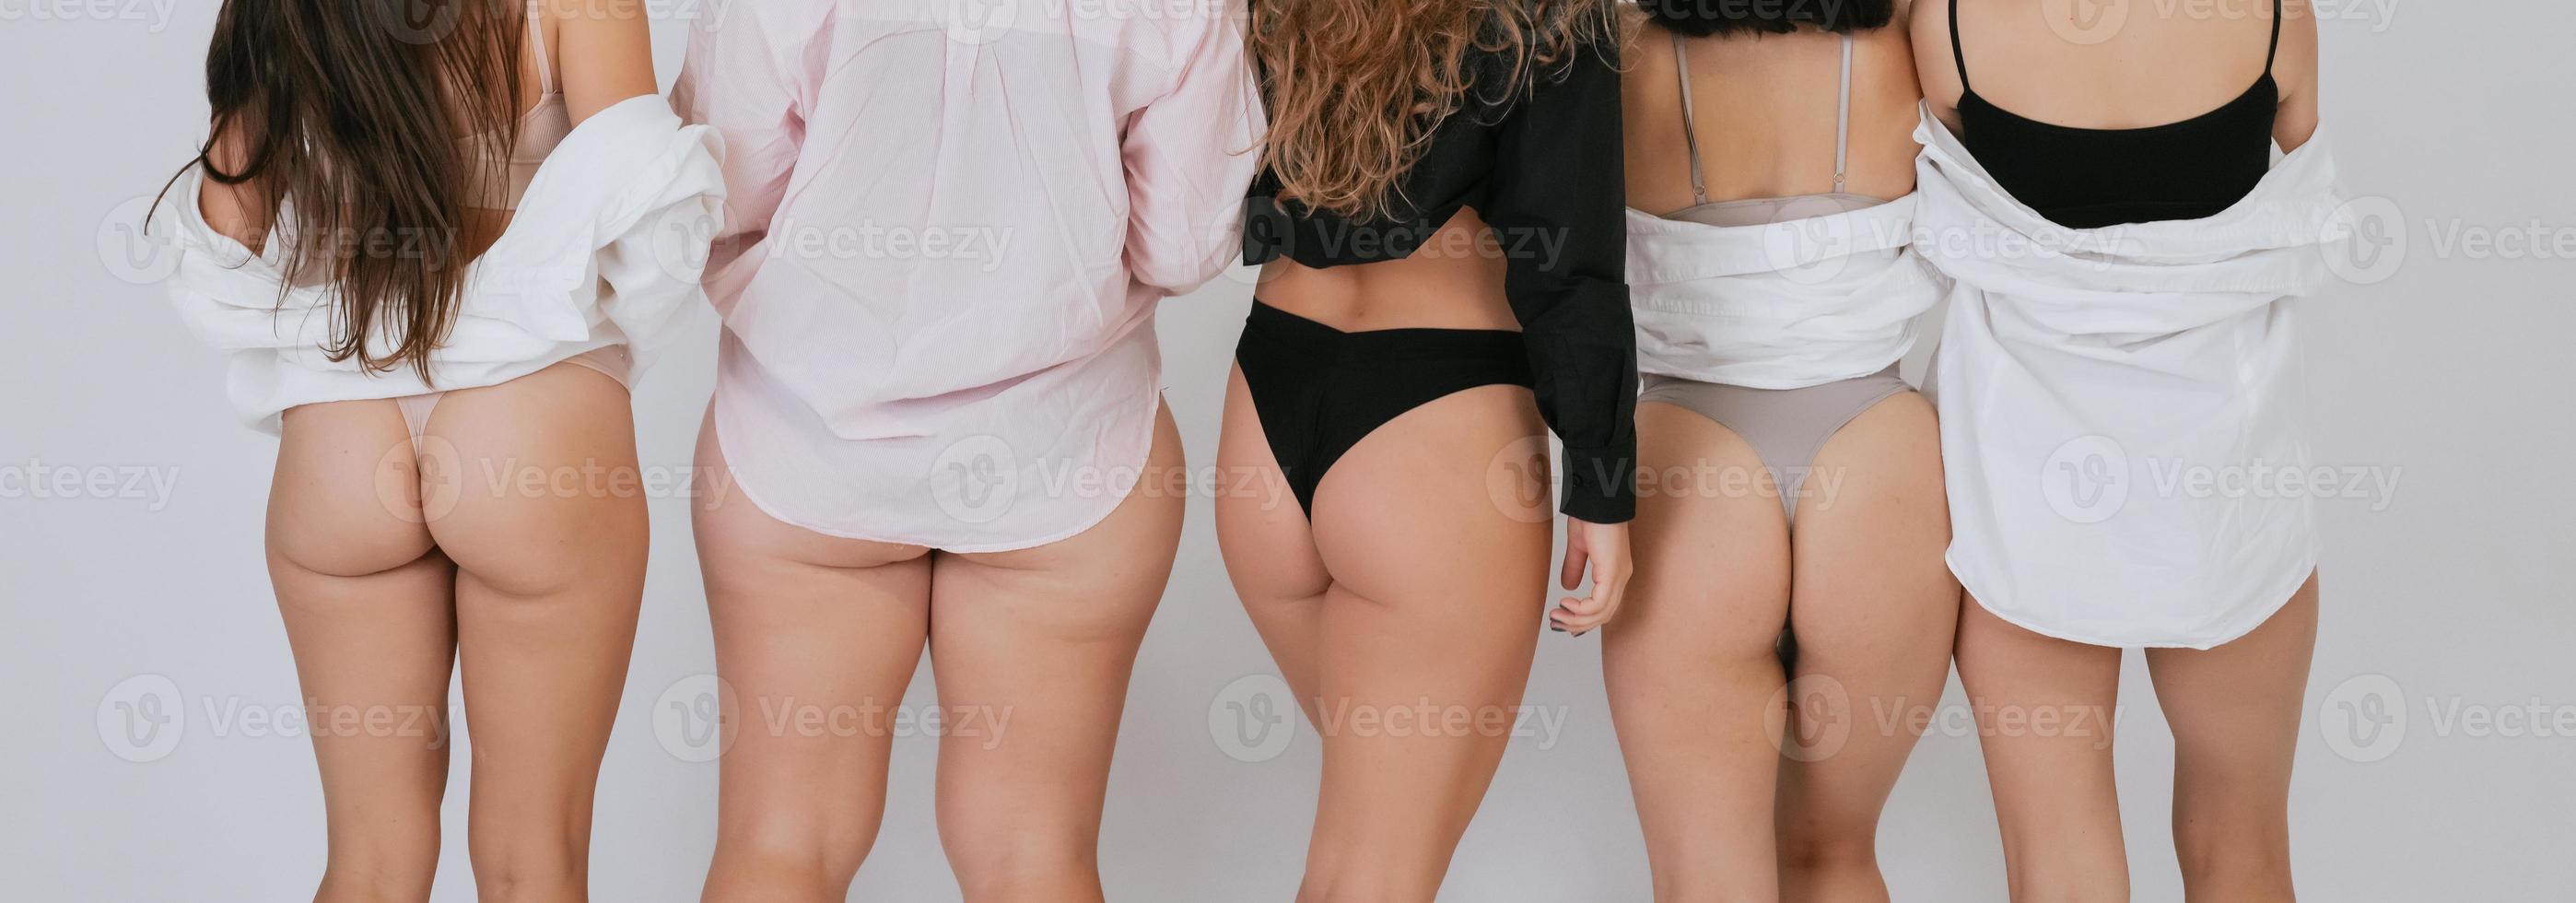 diverse models wearing underwear standing back to camera photo